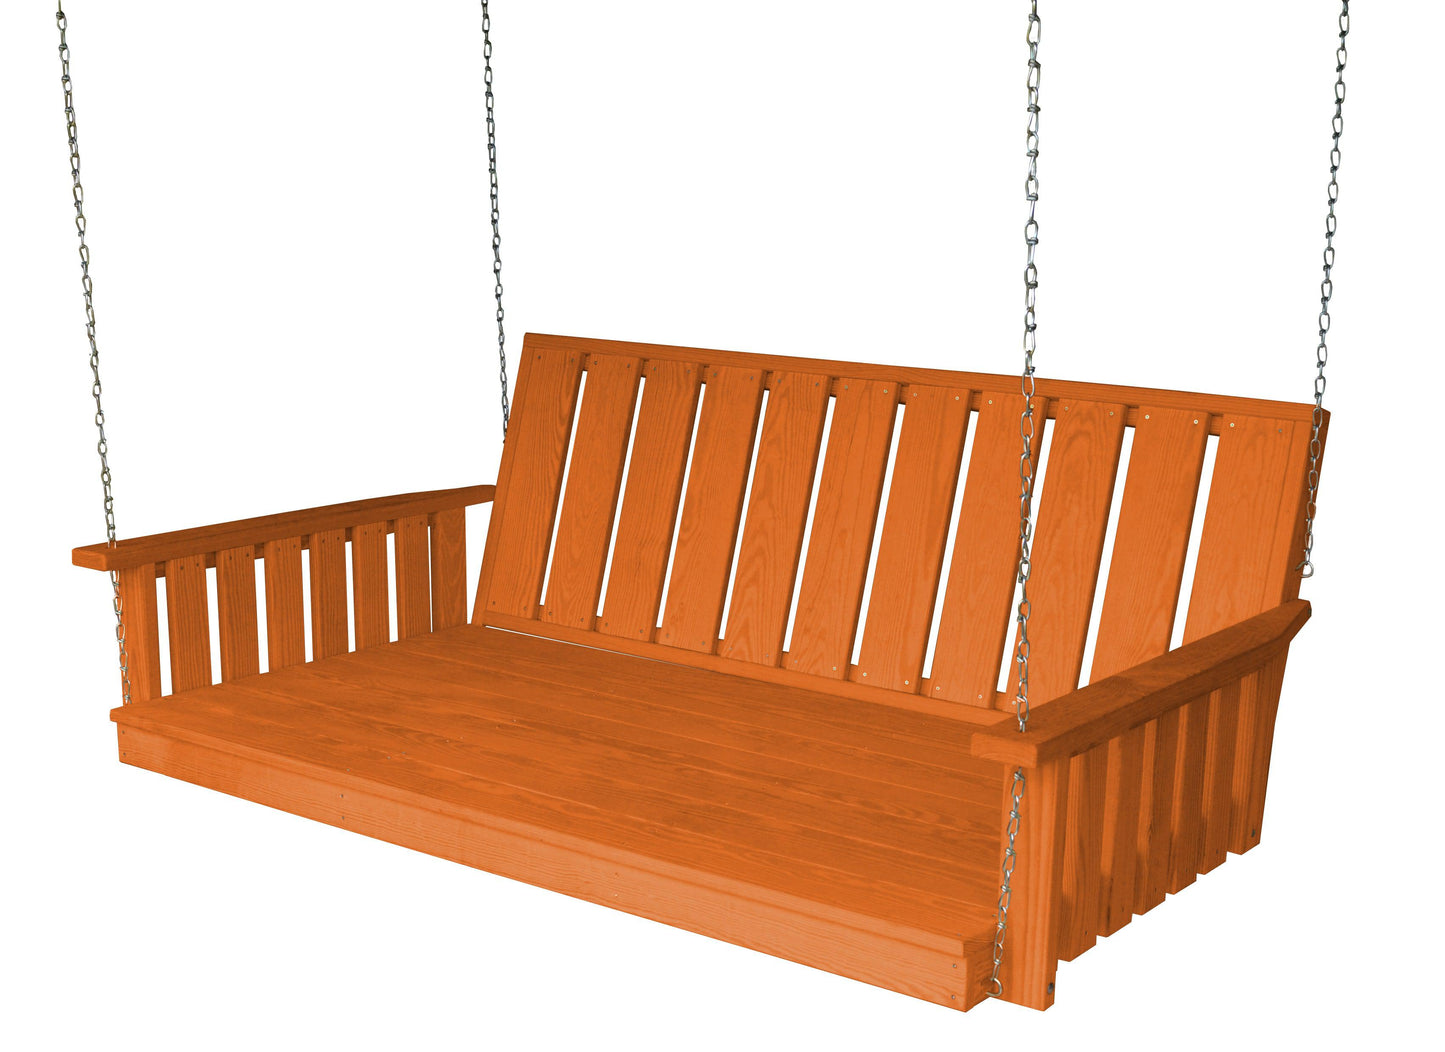 a&l pressure treated pine 75" wingate swingbed redwood stain